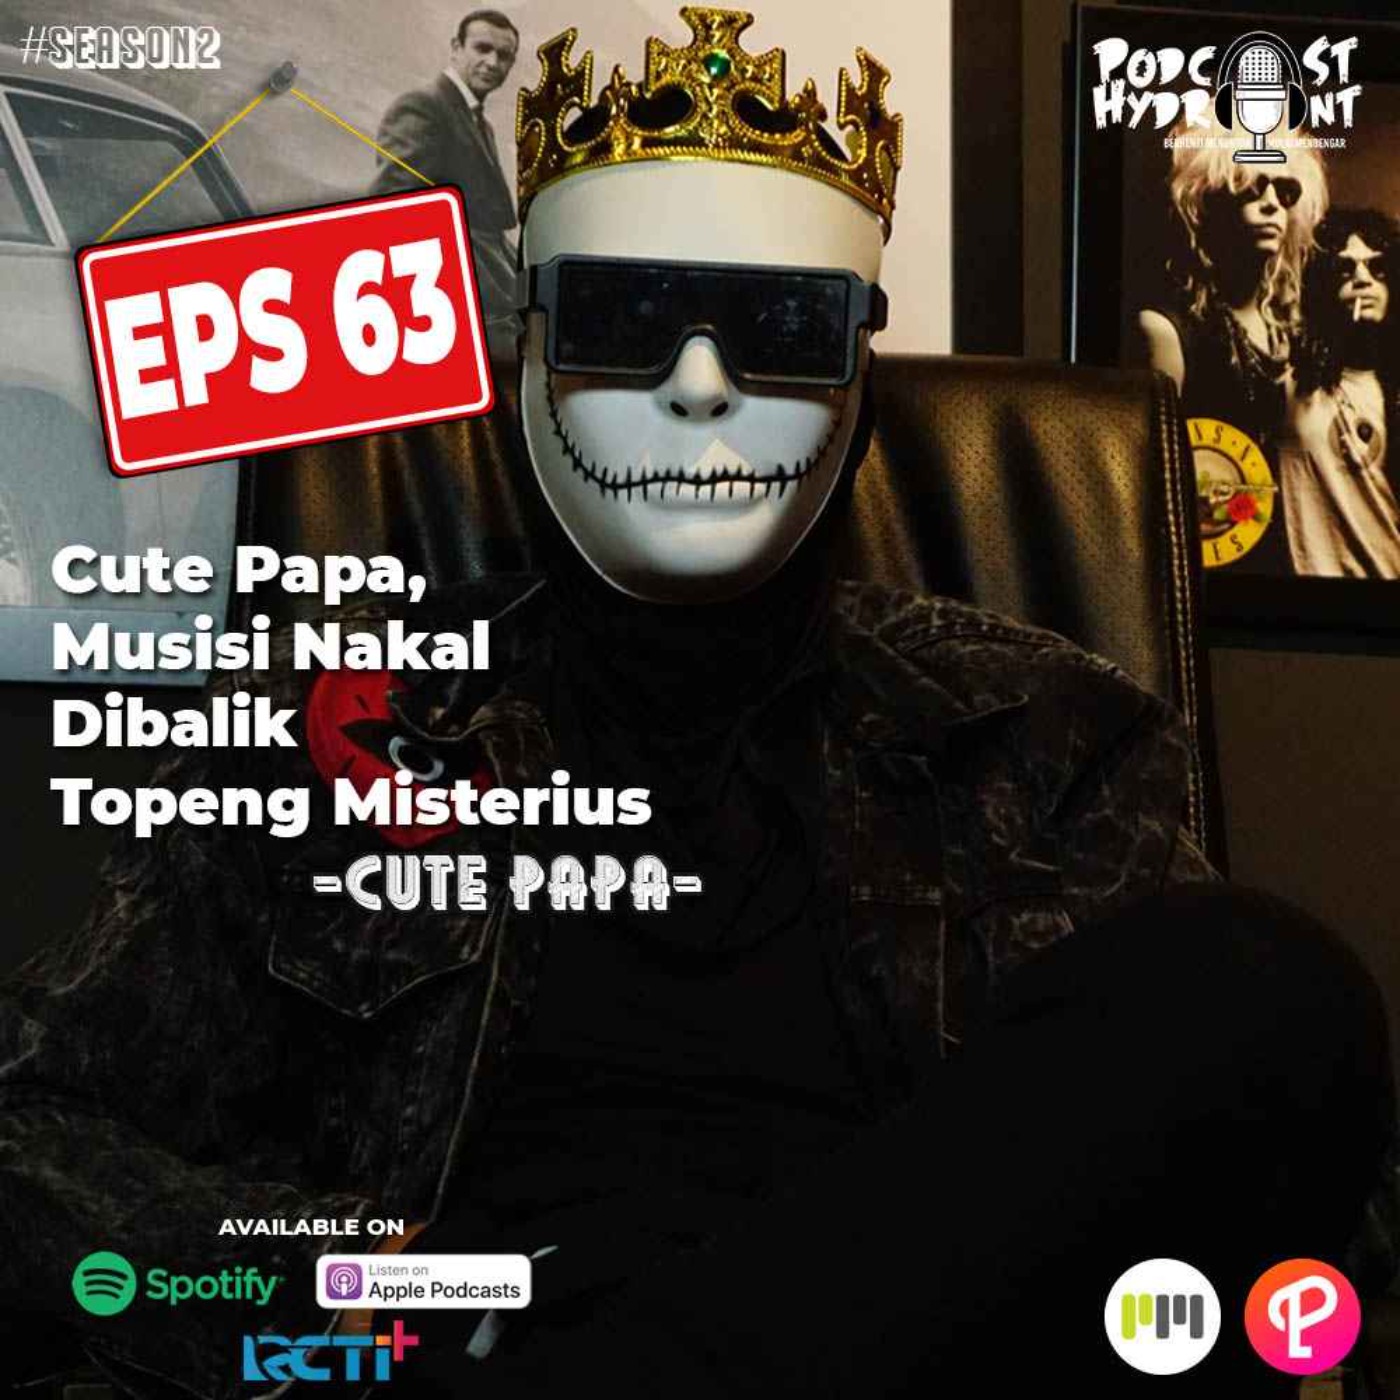 cover art for S2 Eps 63 Cute Papa, Musisi Nakal Dibalik Topeng Misterius with Cute Papa